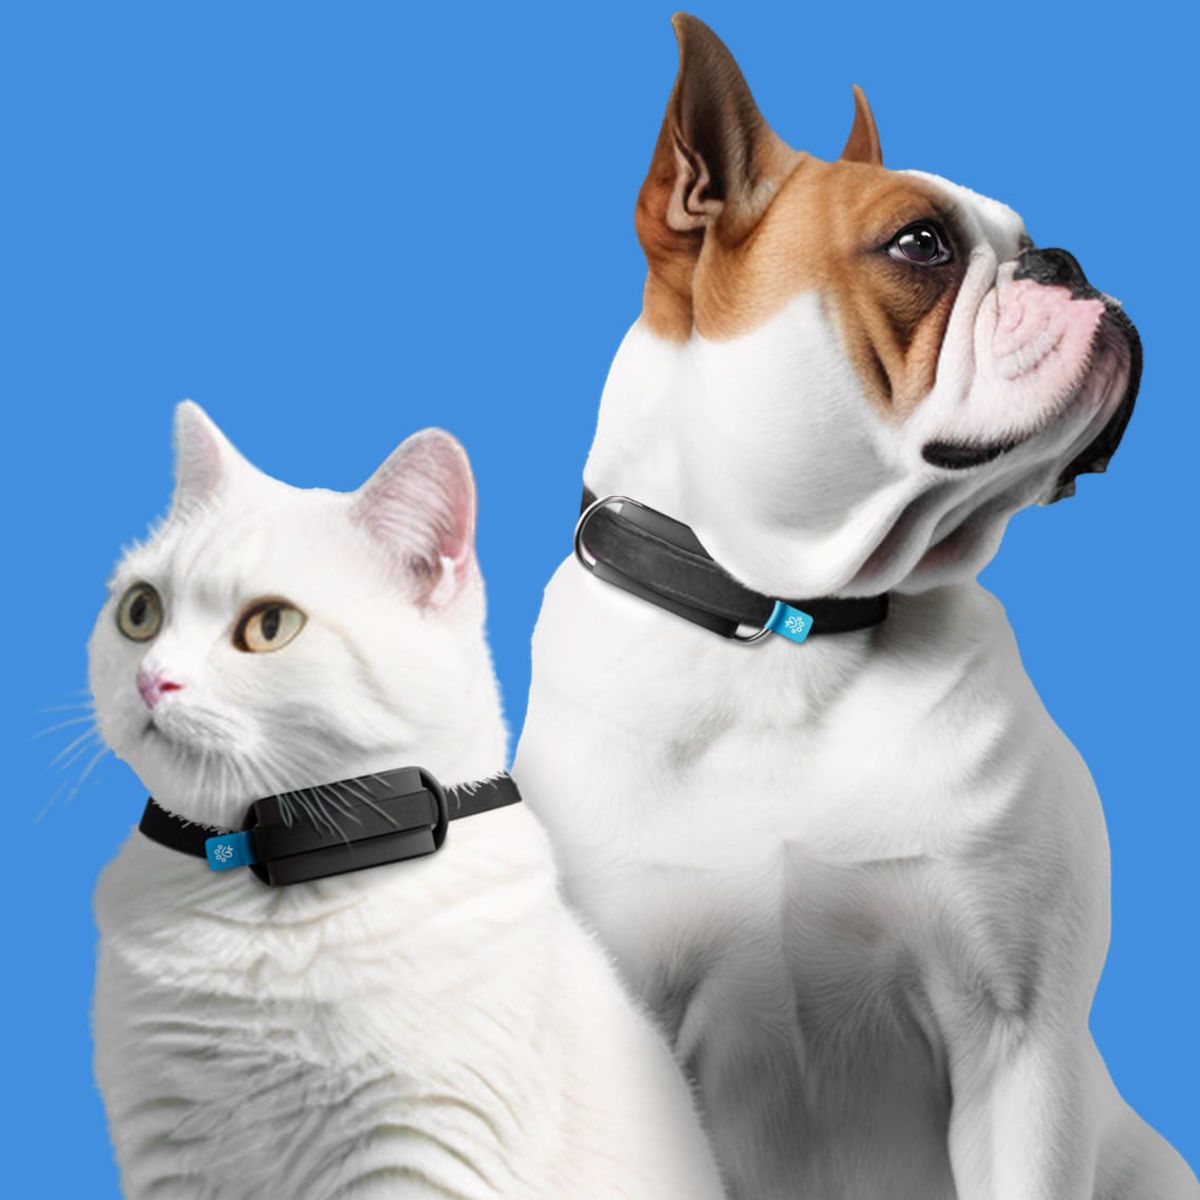 Invoxia Pet Tracker - Activity monitoring and GPS area tracking for pets